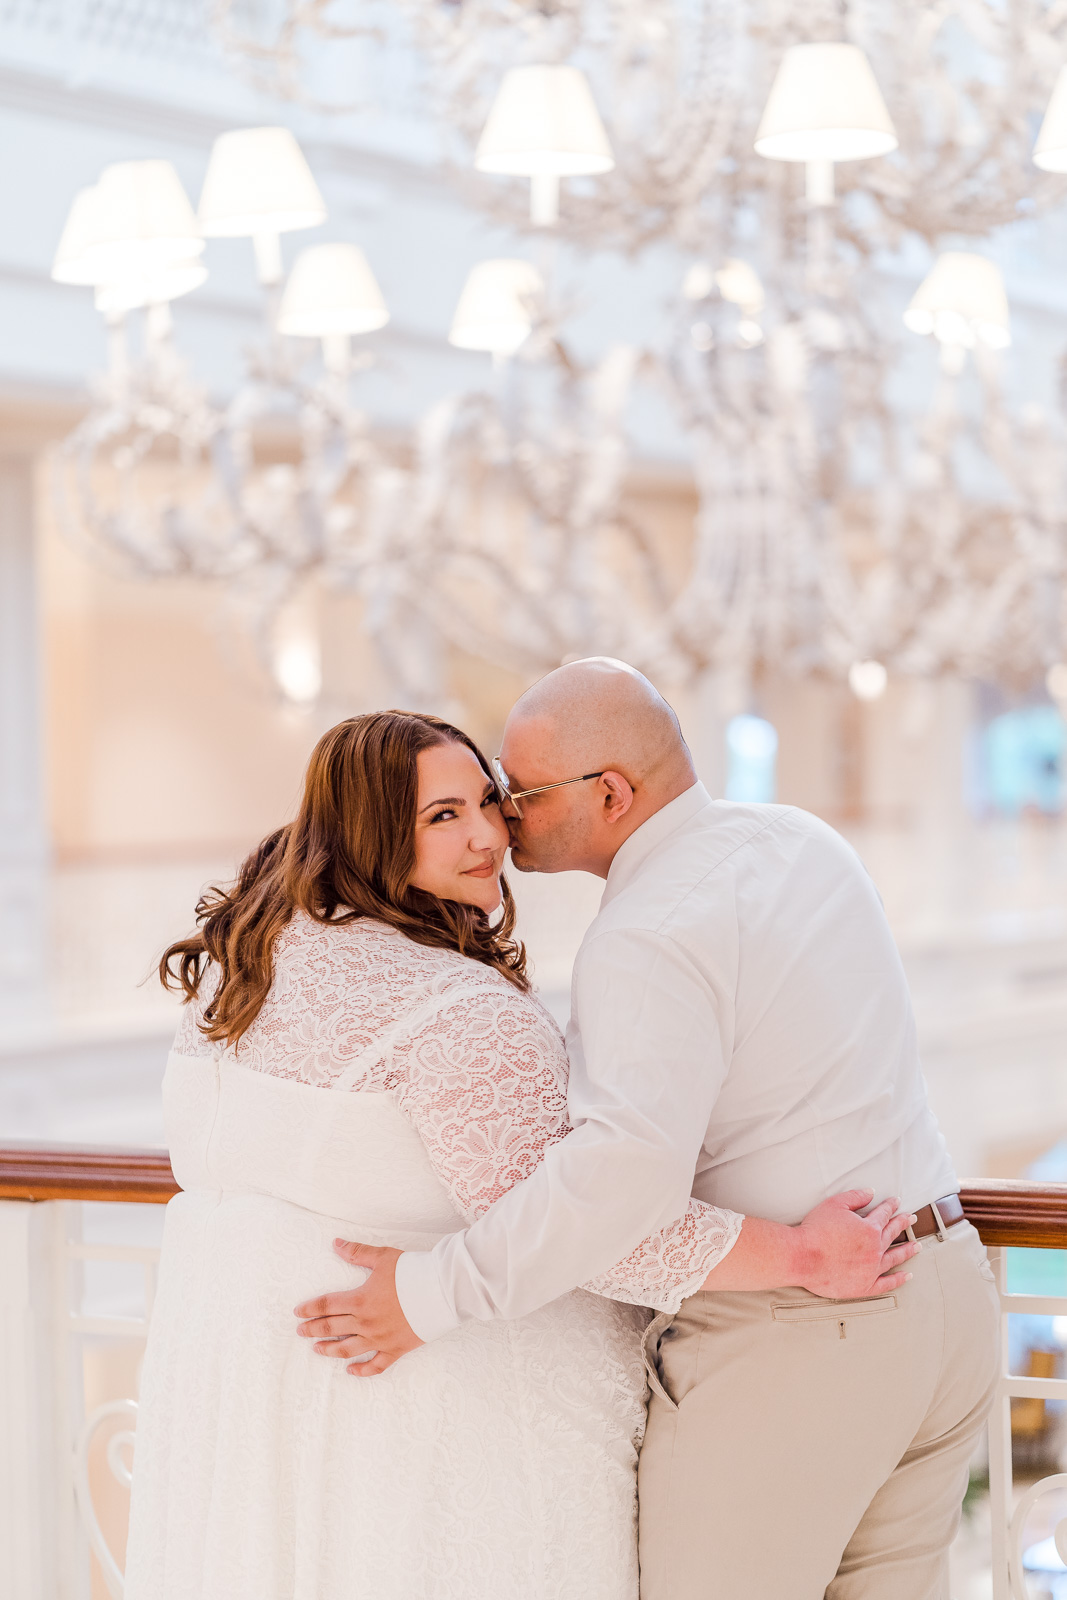 Engagement photography with plus size bride in Orlando Florida at Disney Grand Floridian resort